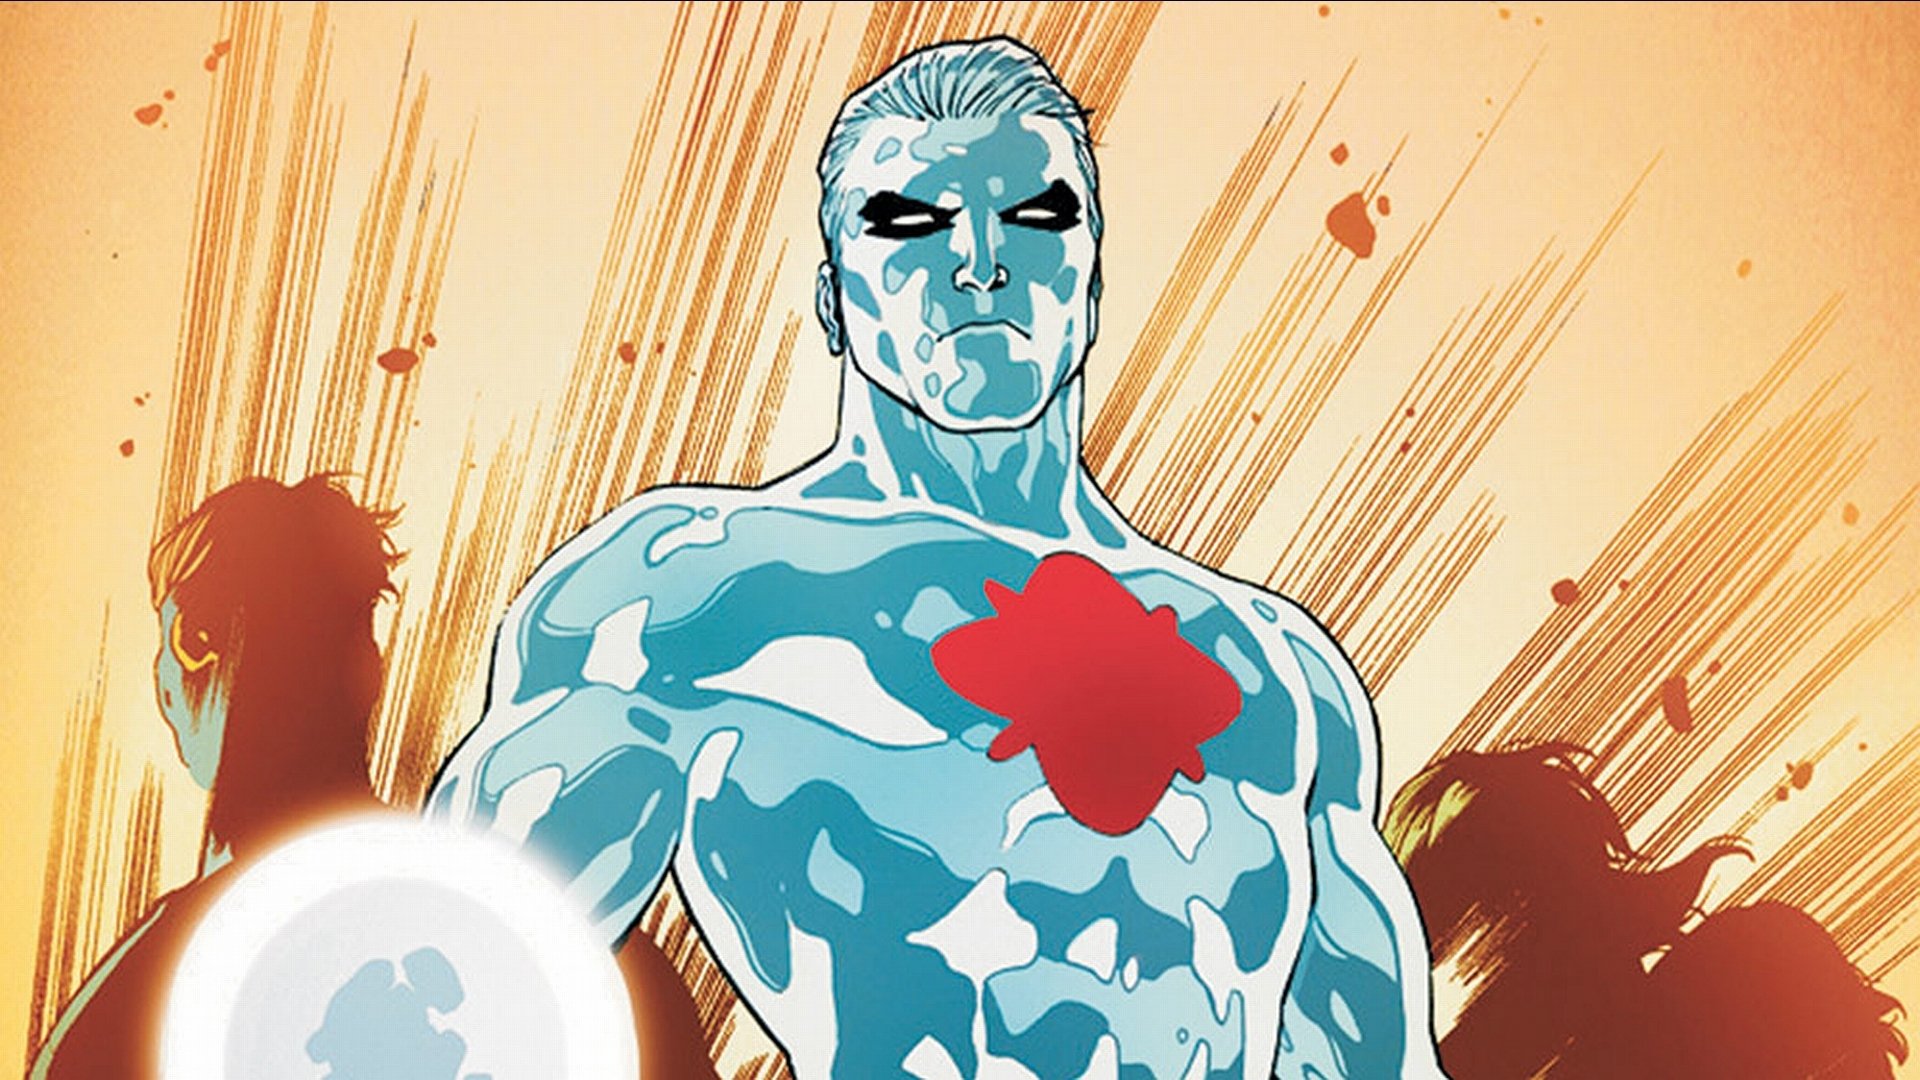 Captain Atom HD Wallpaper Background Image Id